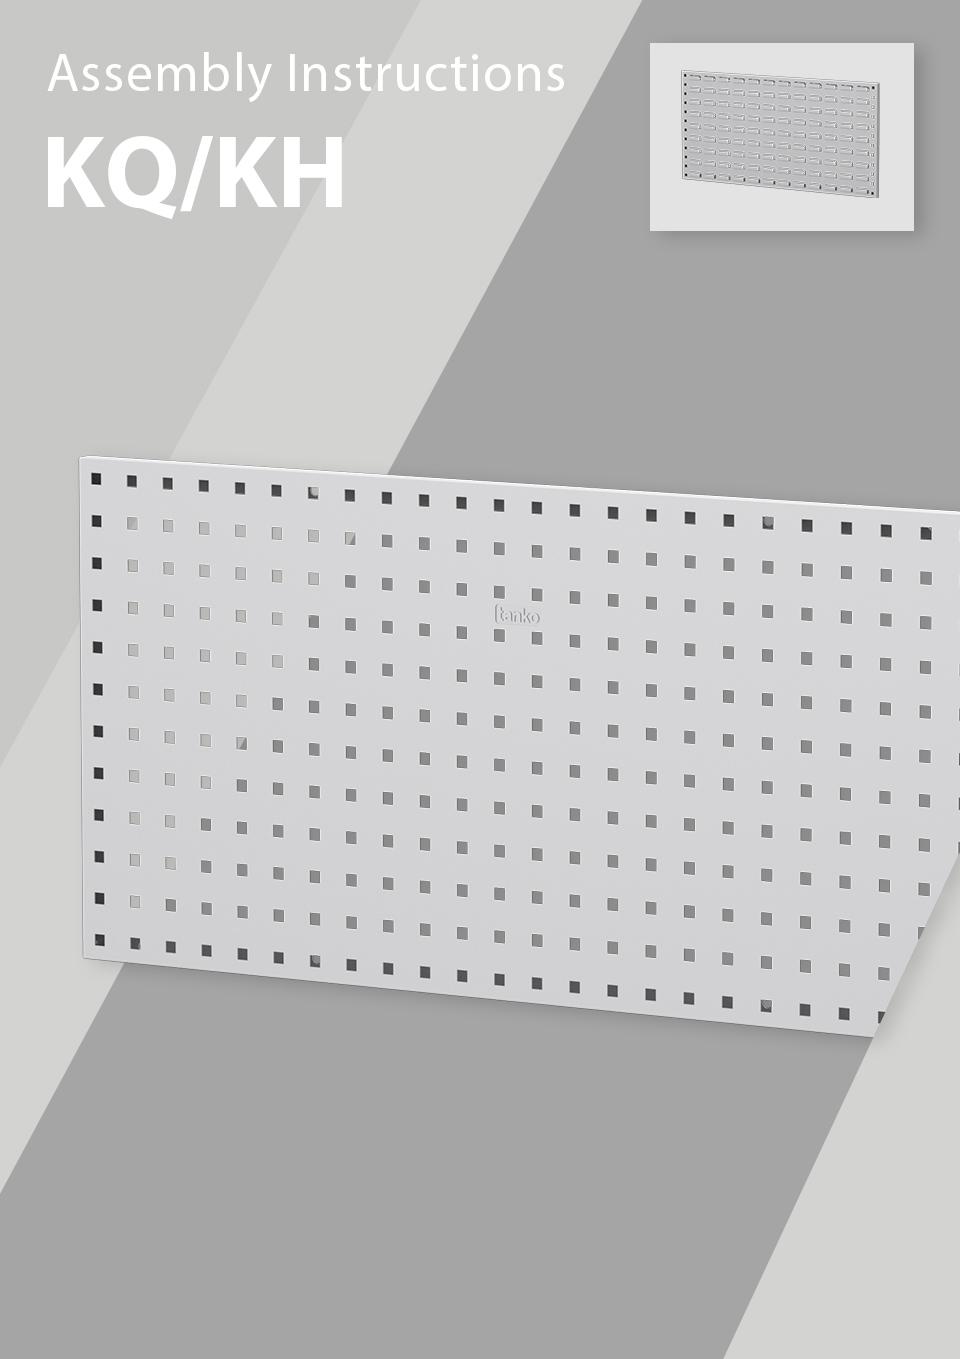 KQ / KH Perforated Board